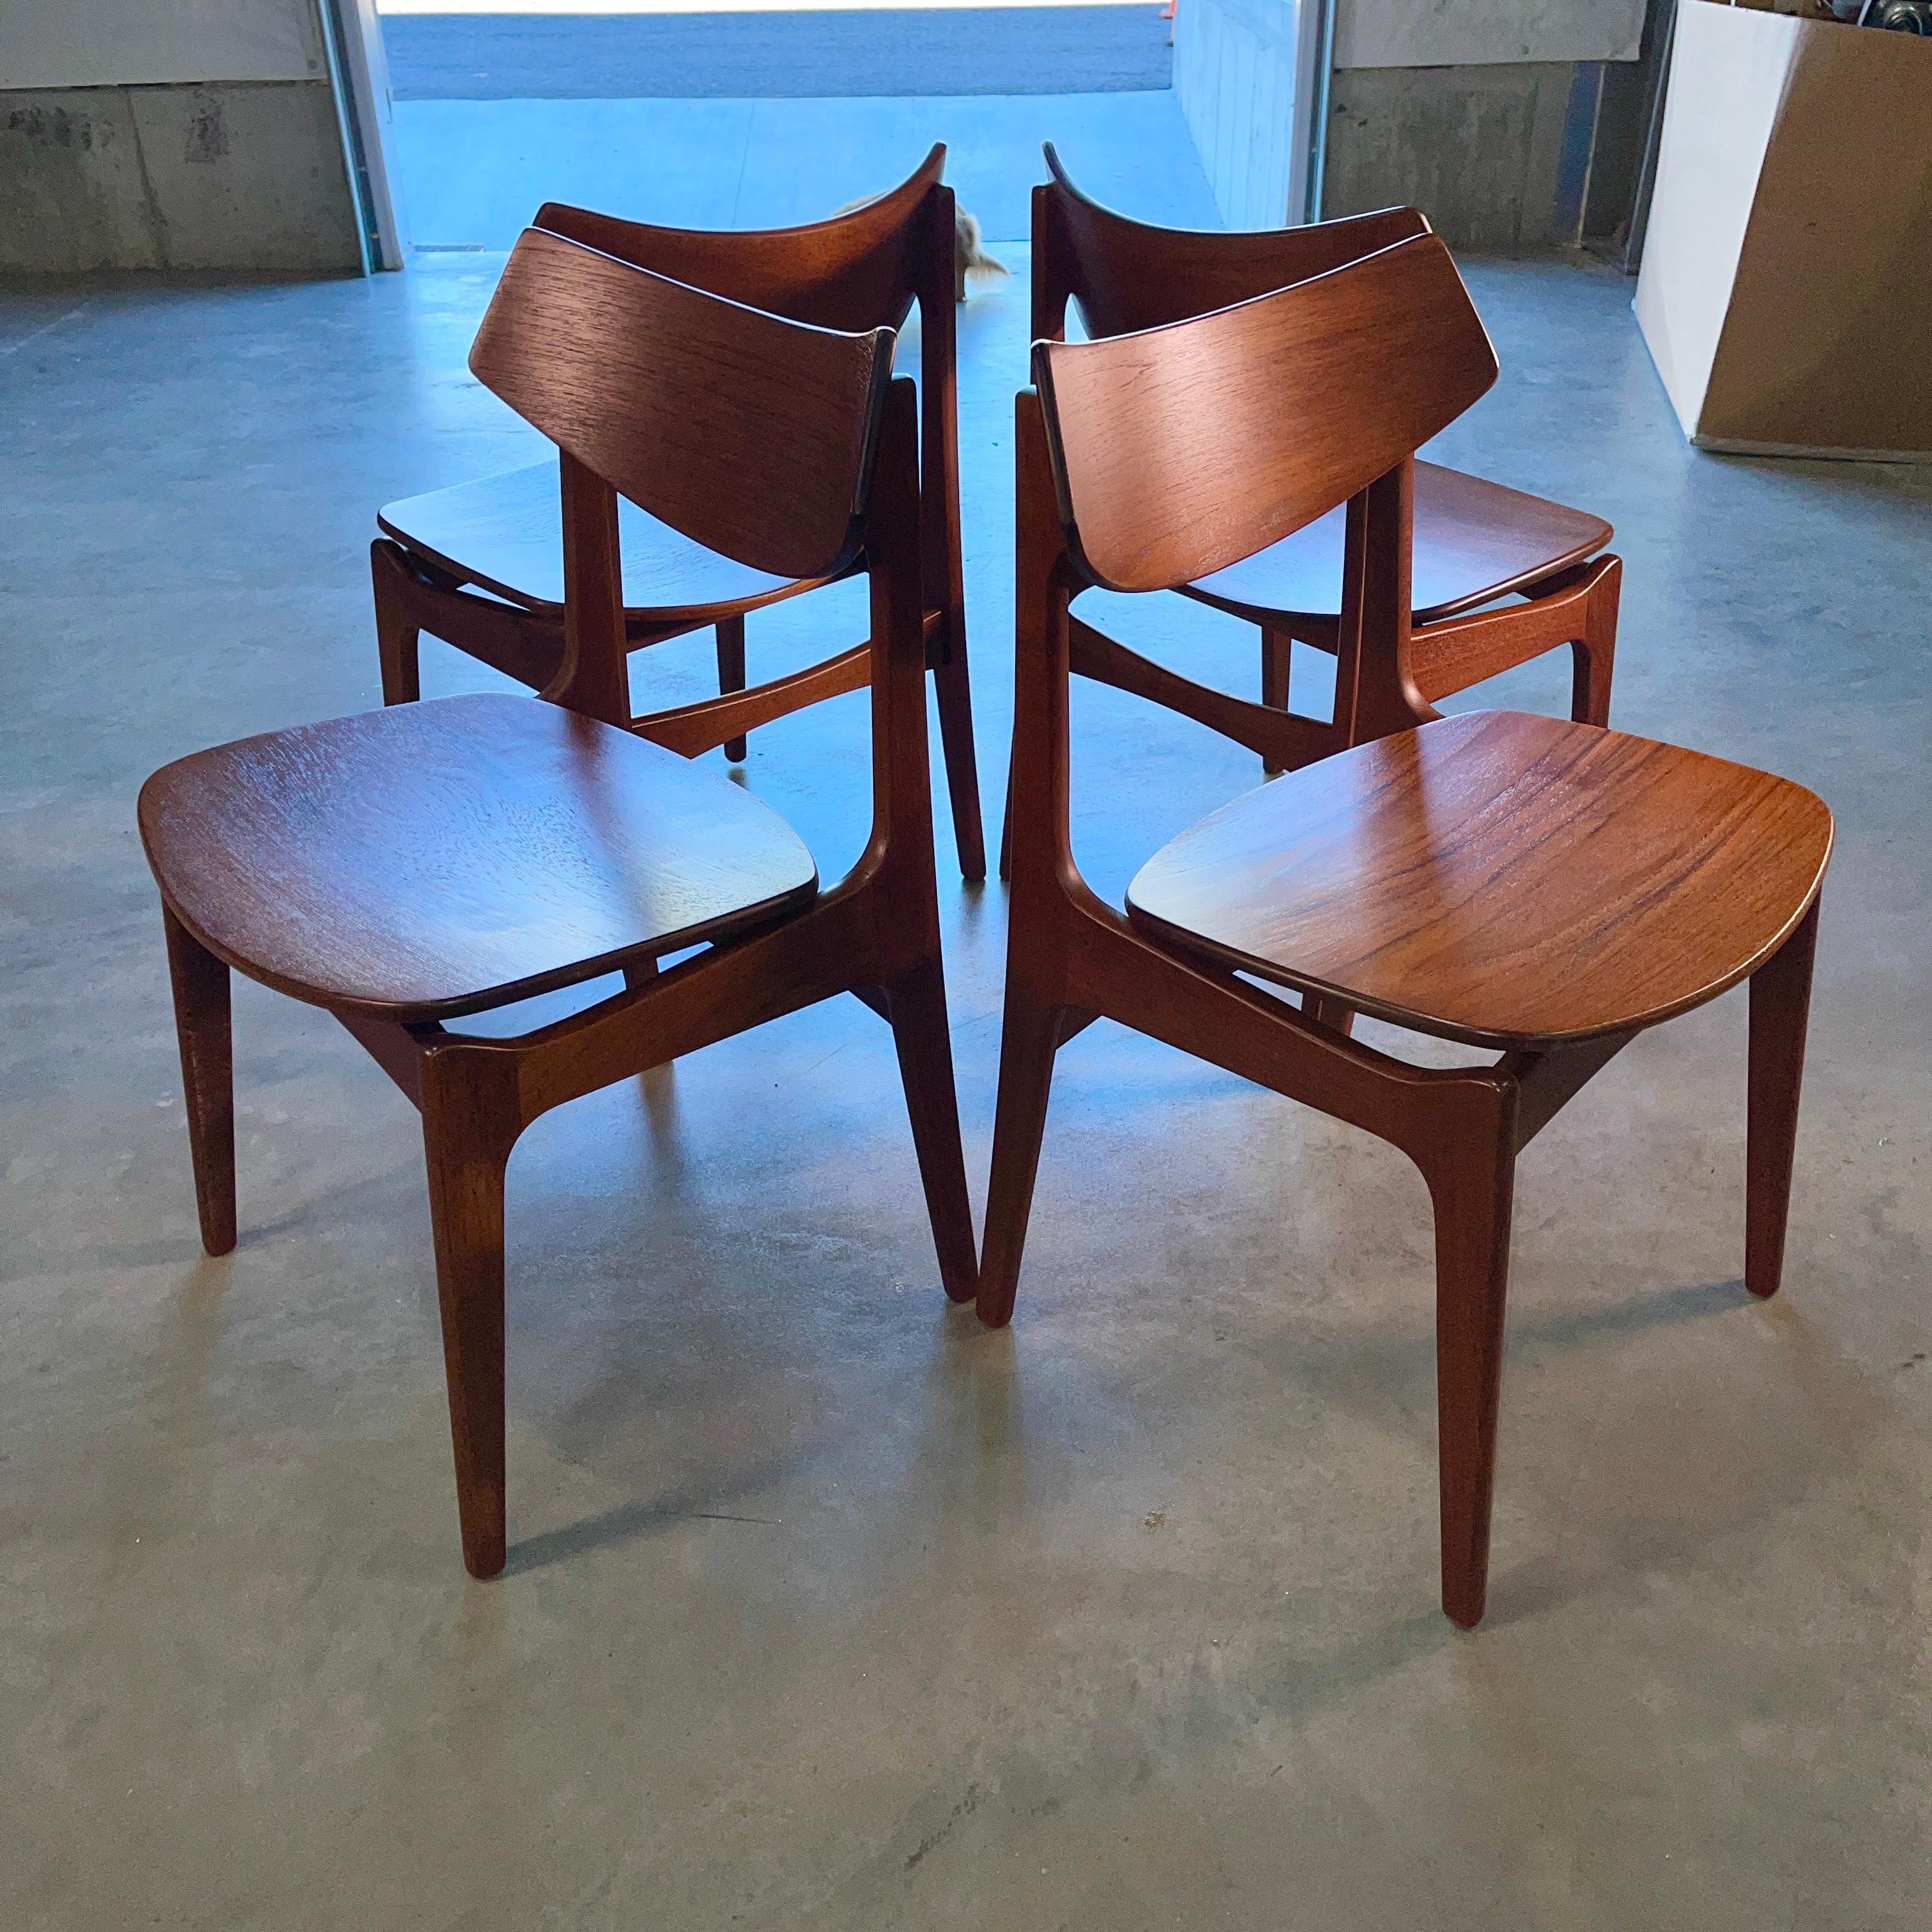 Set of 4 Teak Dining Chairs by Erik Buch for Funder-Schmidt & Madsen, Odense 1